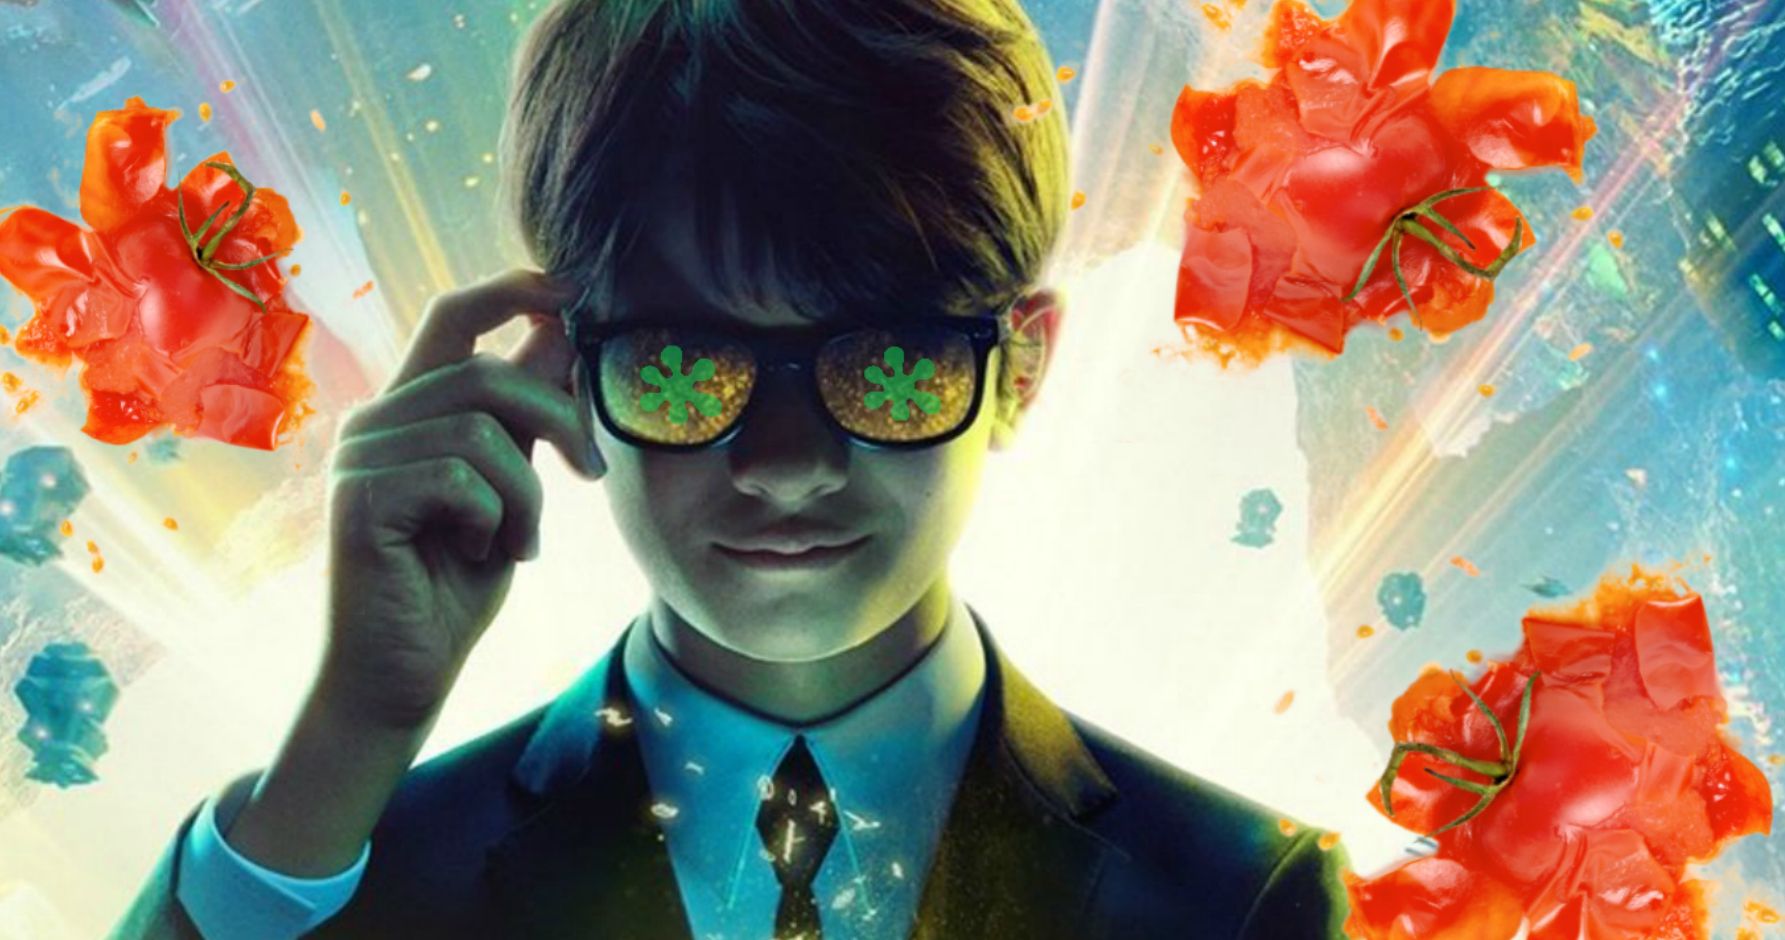 Has Disney changed Artemis Fowl? Why some fans aren't happy with